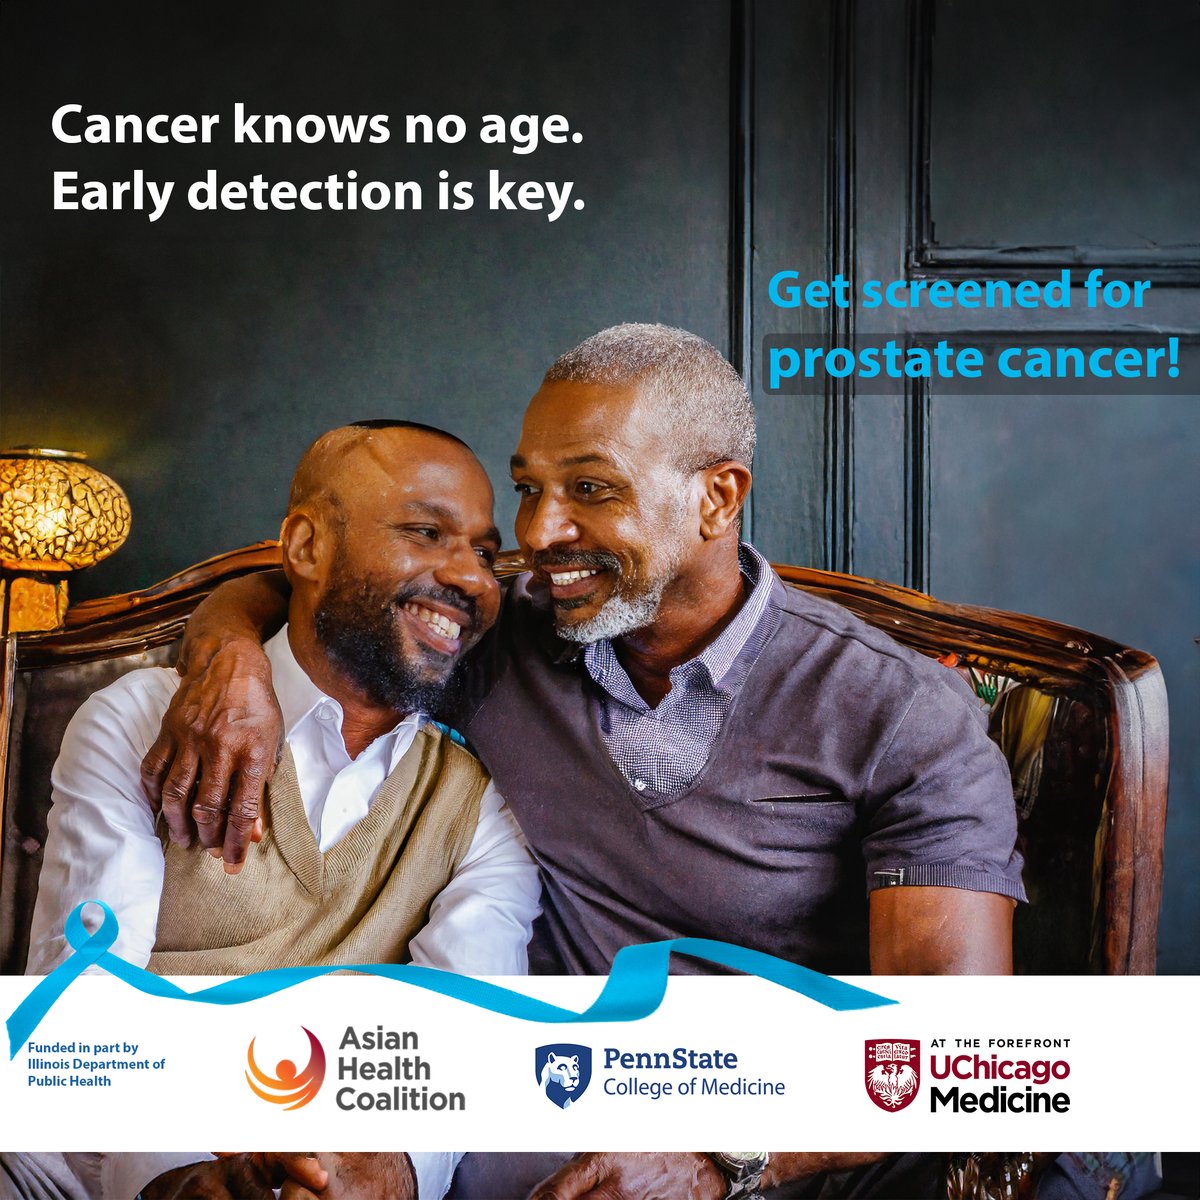 Prostate cancer affects all men, regardless of sexual orientation or gender identity. Let's ensure everyone has access to screening and support. #LGBTQHealth #Inclusivity #ScreeningForAll
#ProstateCancerAwareness
youtu.be/SBjYAiWBqpI